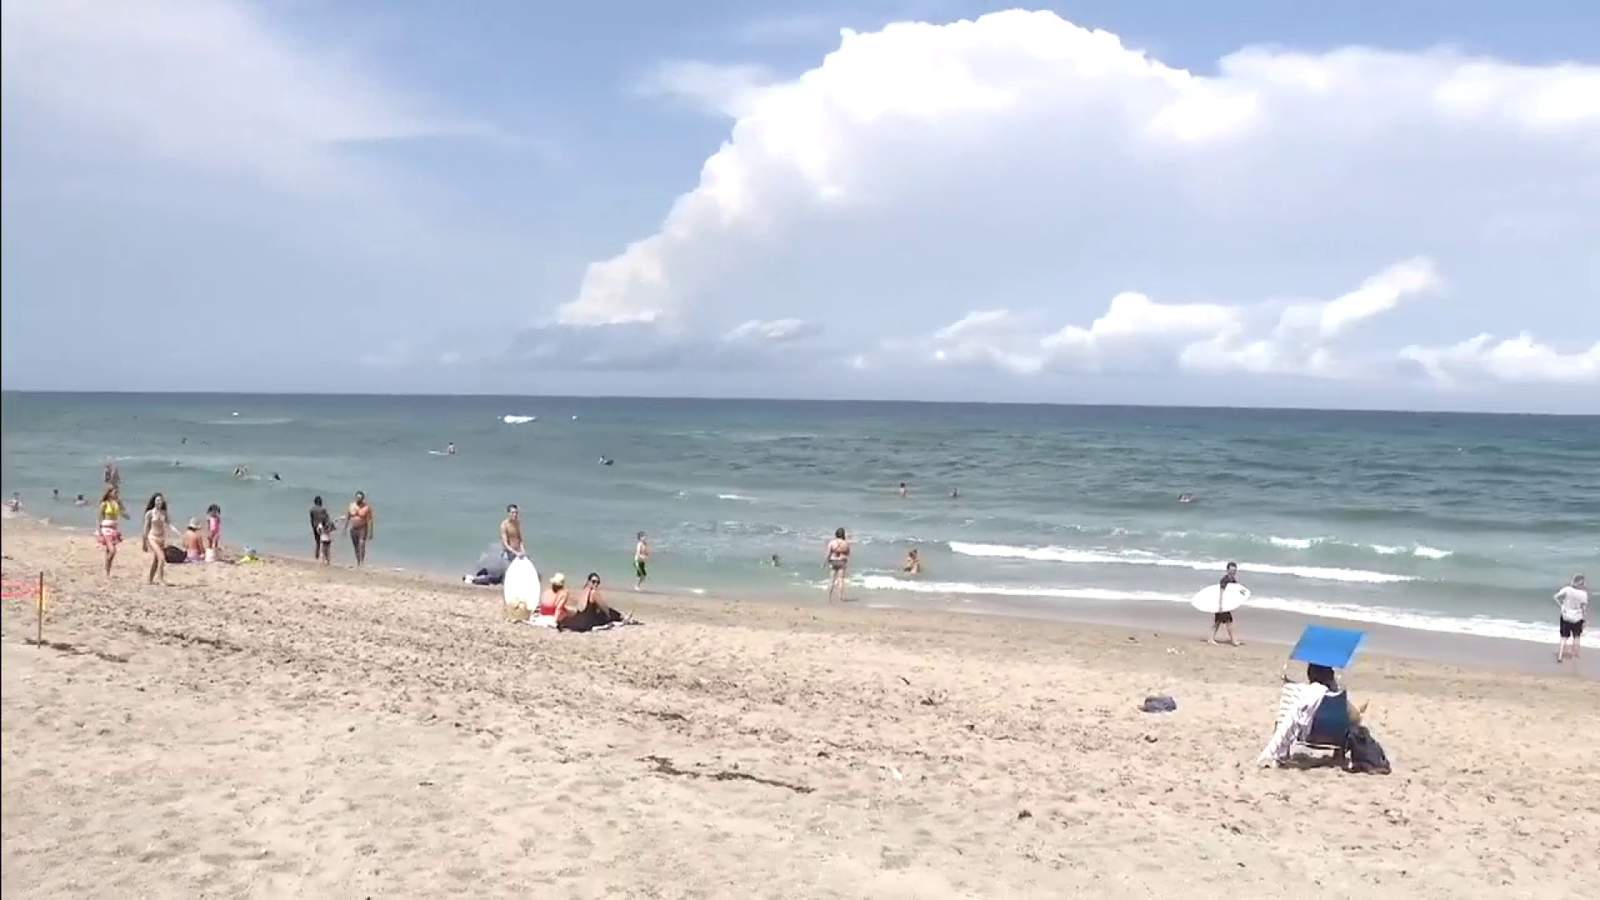 Boca Raton and Delray beaches give South Floridians a chance to return to the sand and surf